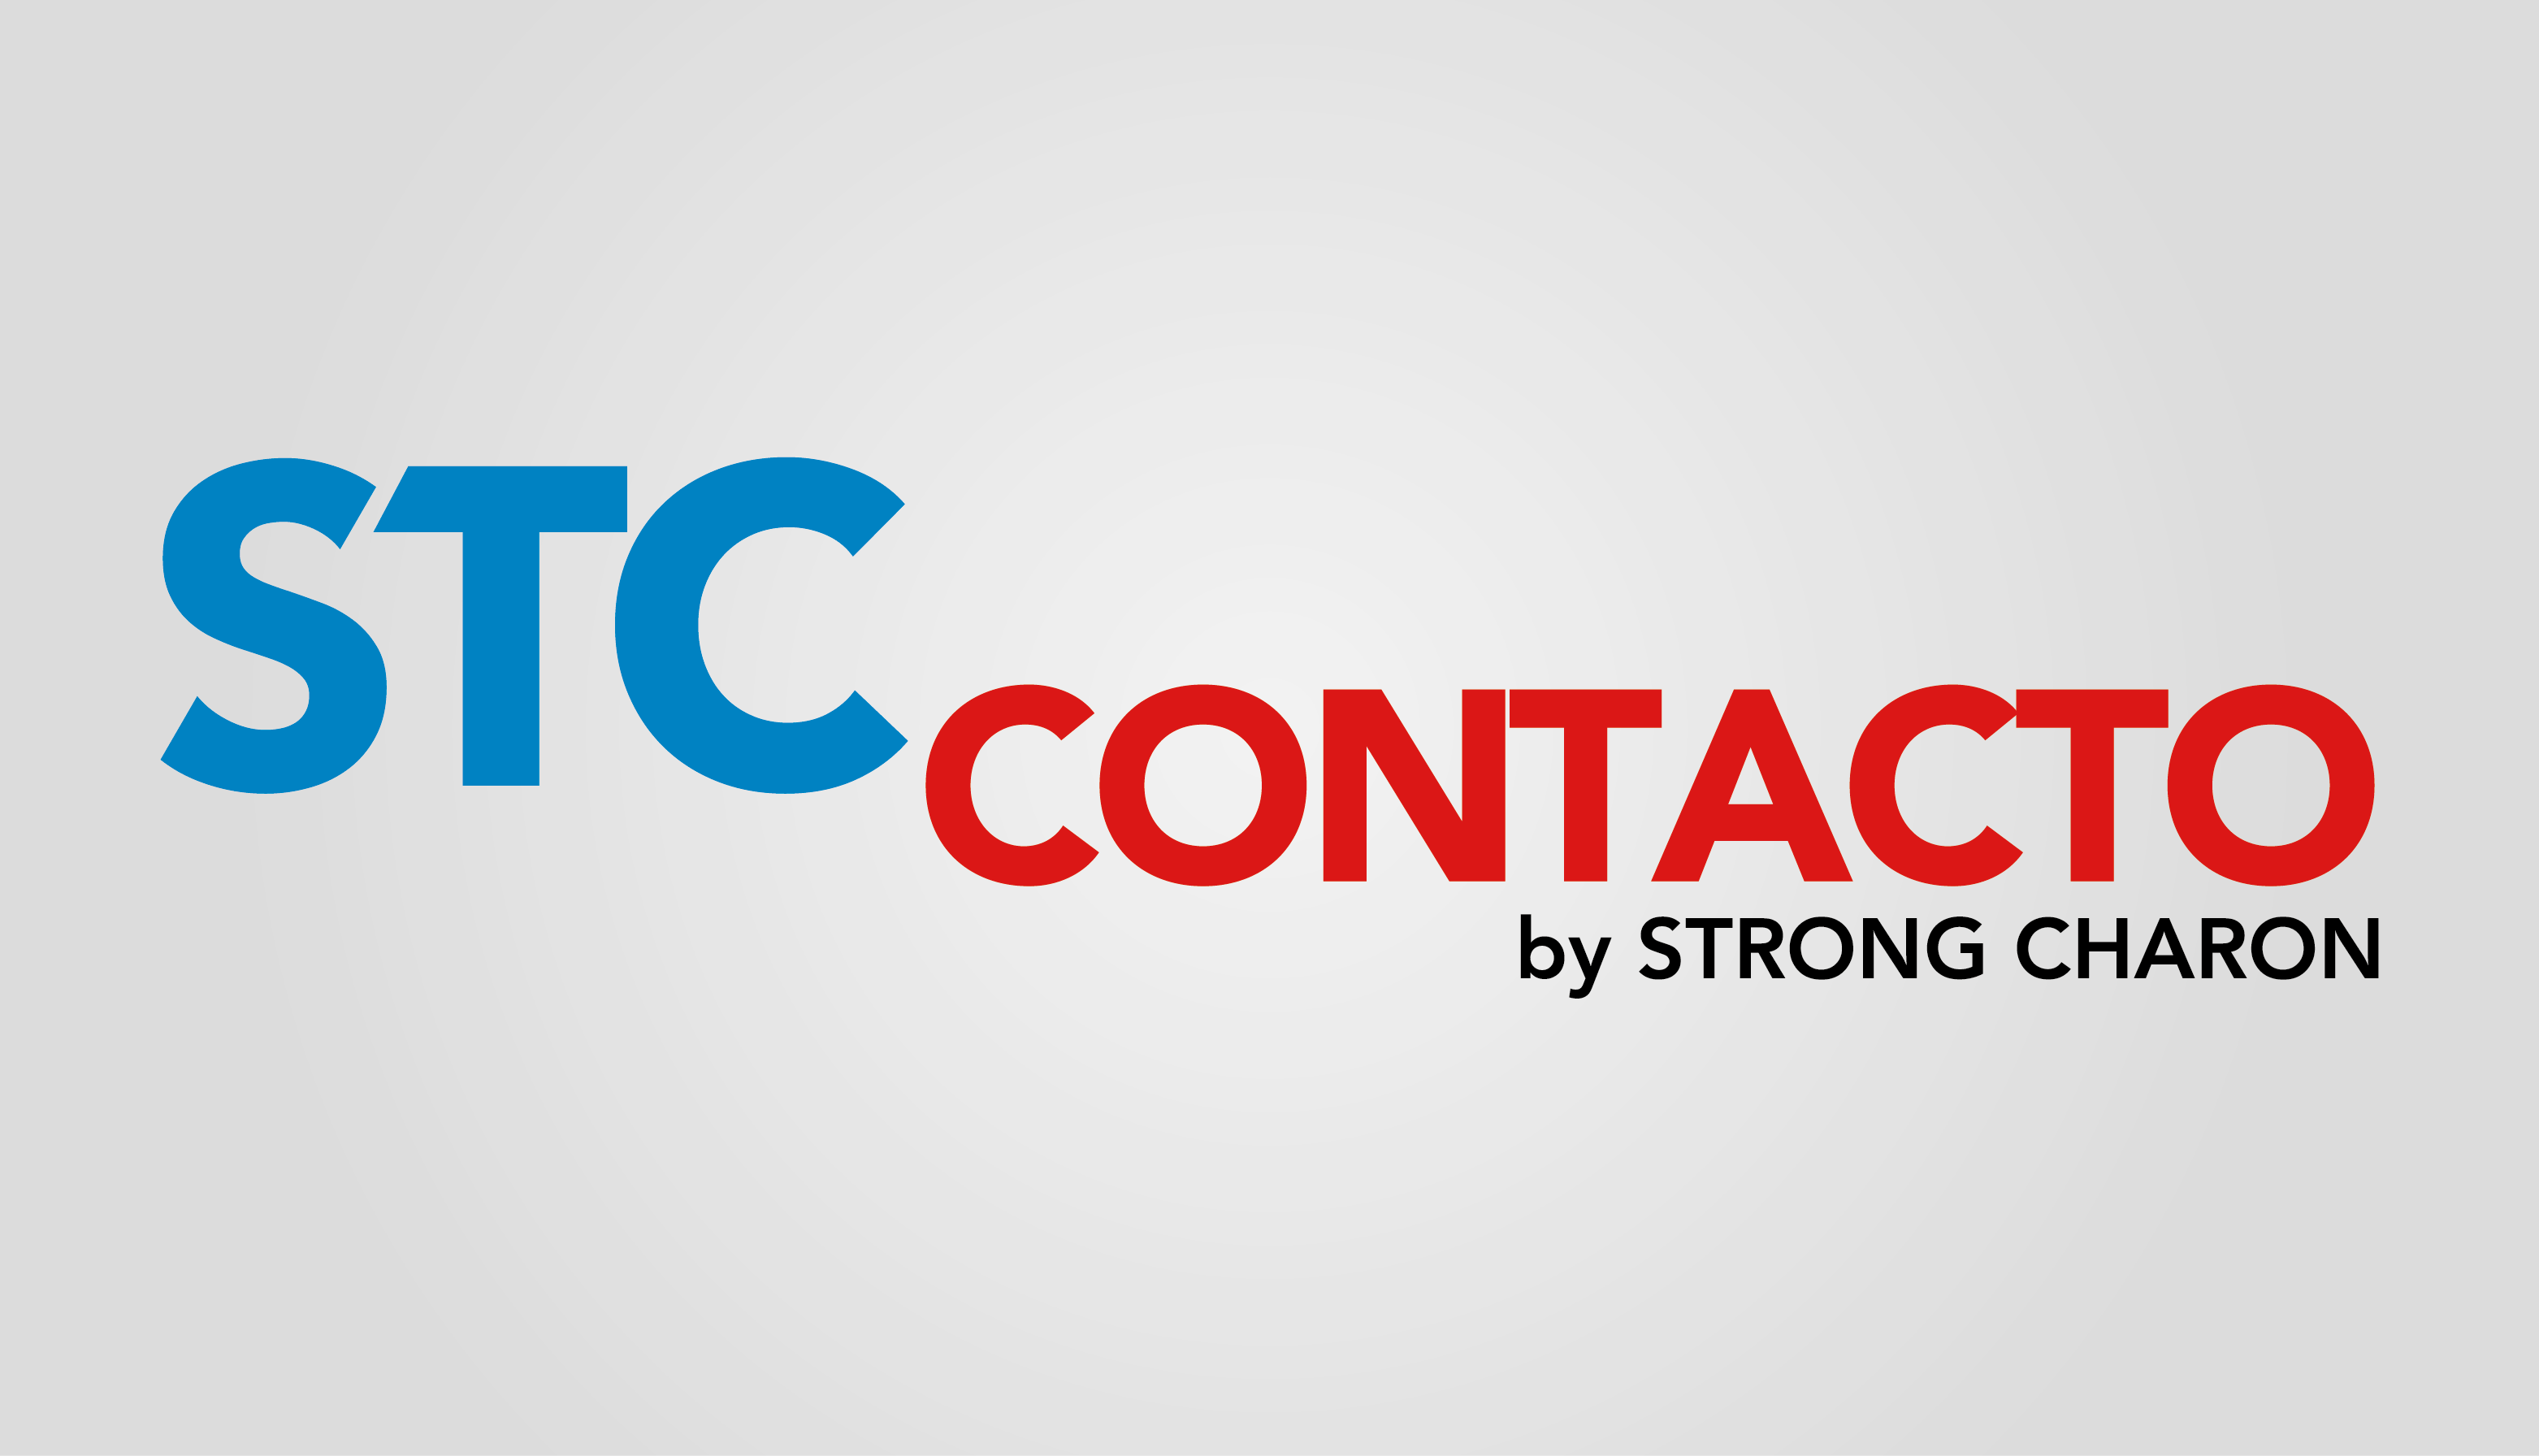 STC CONTACTO by Strong Charon